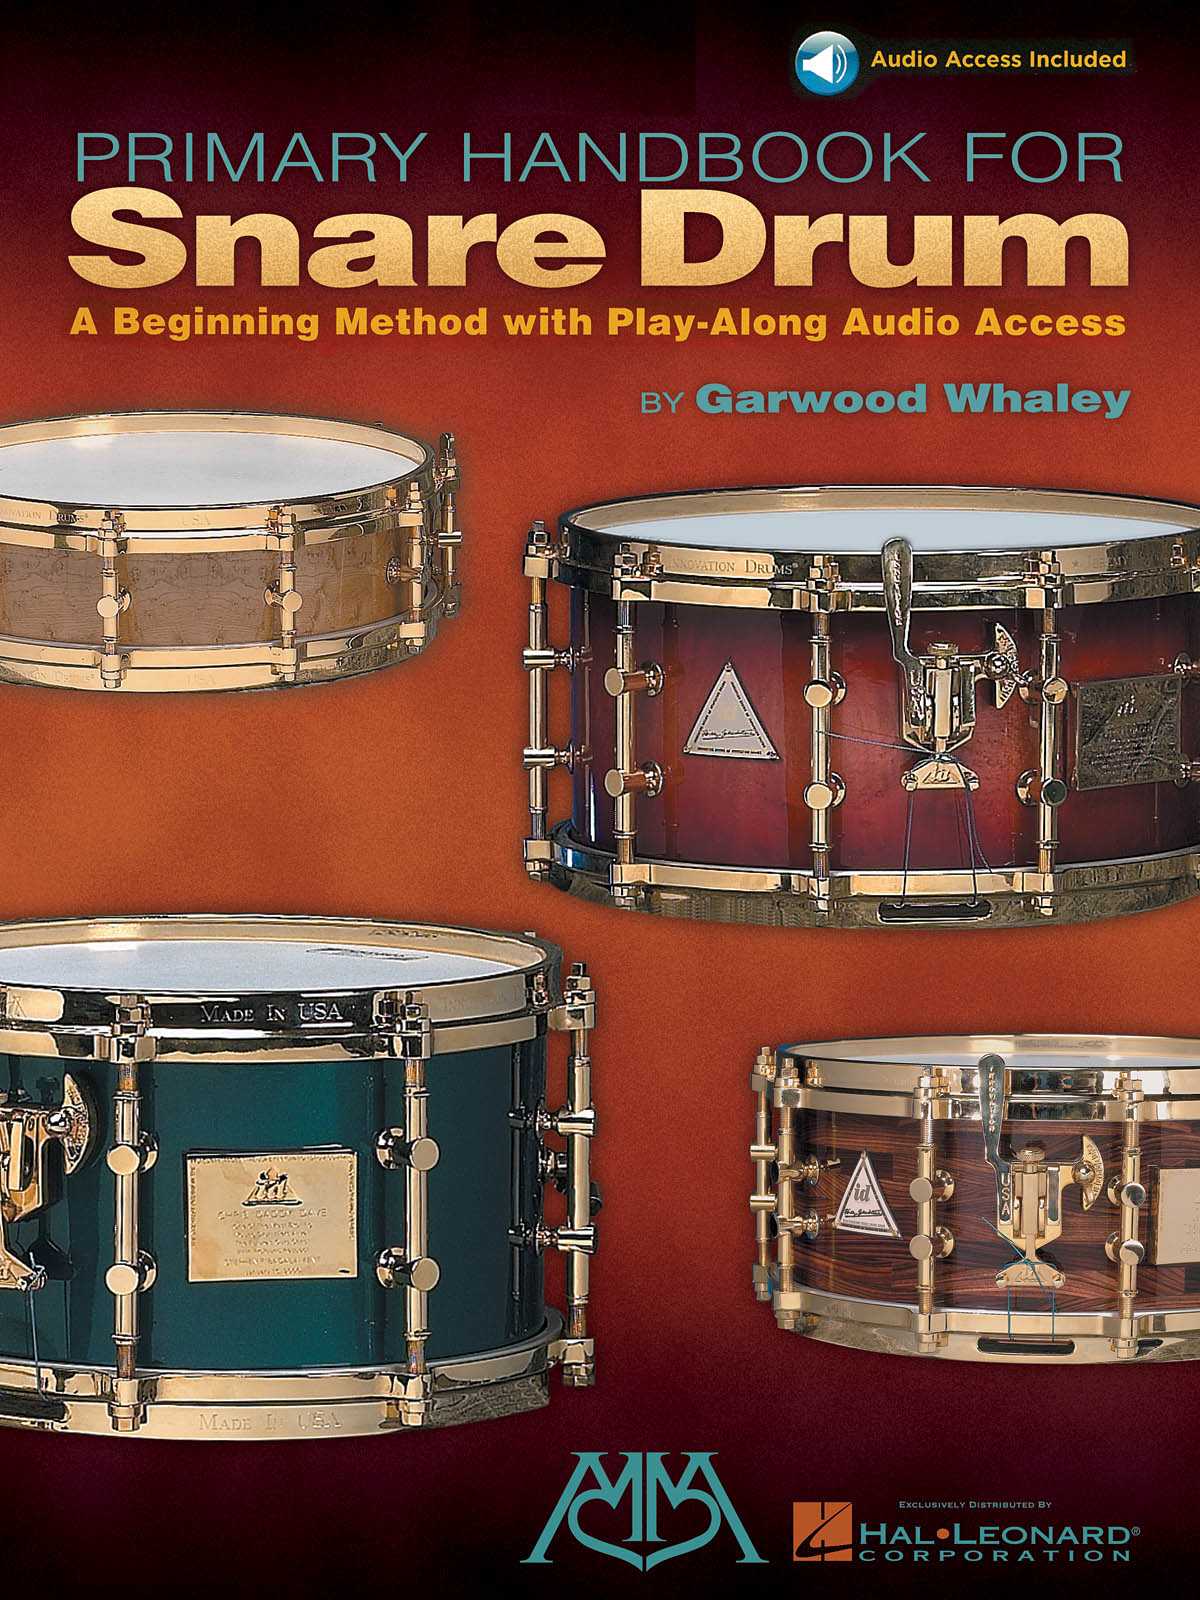 Primary Handbook For Snare Drum (with Audio) by Garwood Whaley